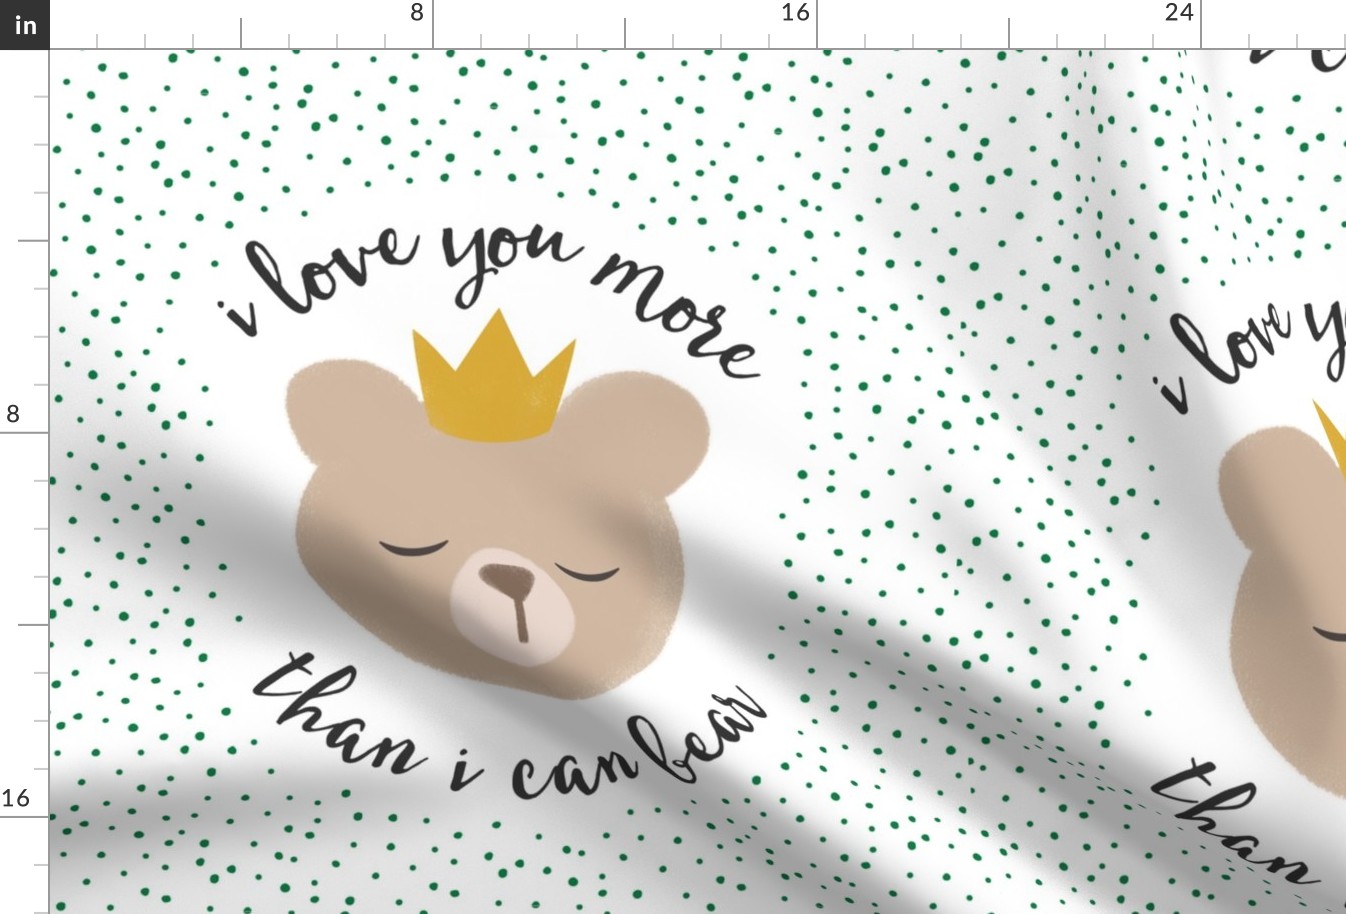 18" square - I love you more than I can bear - crown - green dots